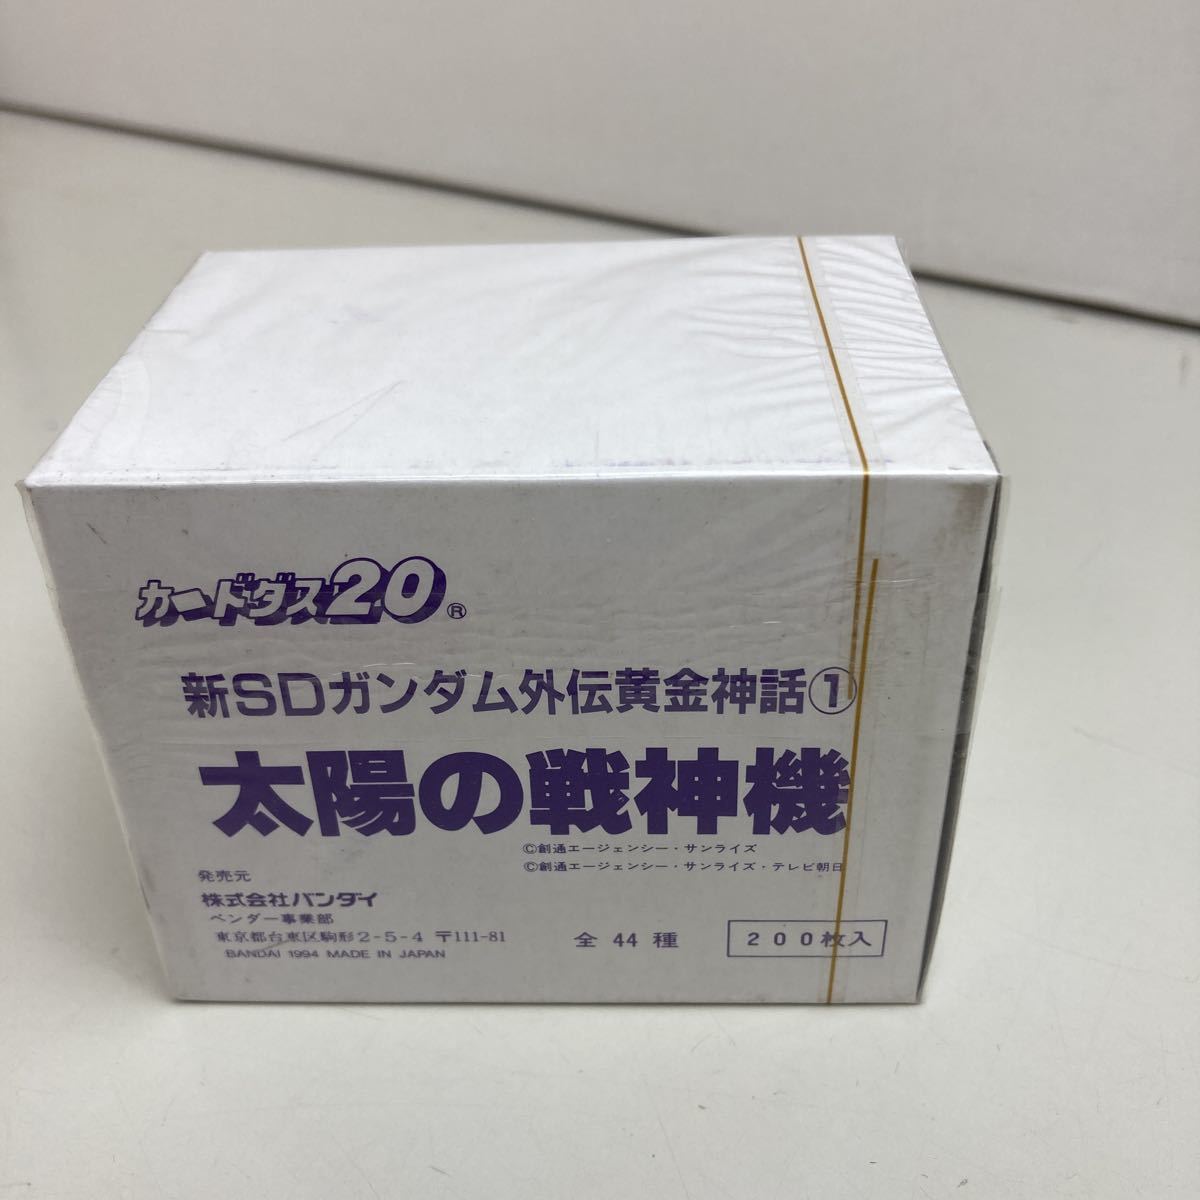 ** rare goods *CARDDASS* unopened * Carddas 20* new SD Gundam out . yellow gold myth ①* sun. war god machine *1BOX* that time thing * beautiful goods * Showa Retro * out of print * rare 